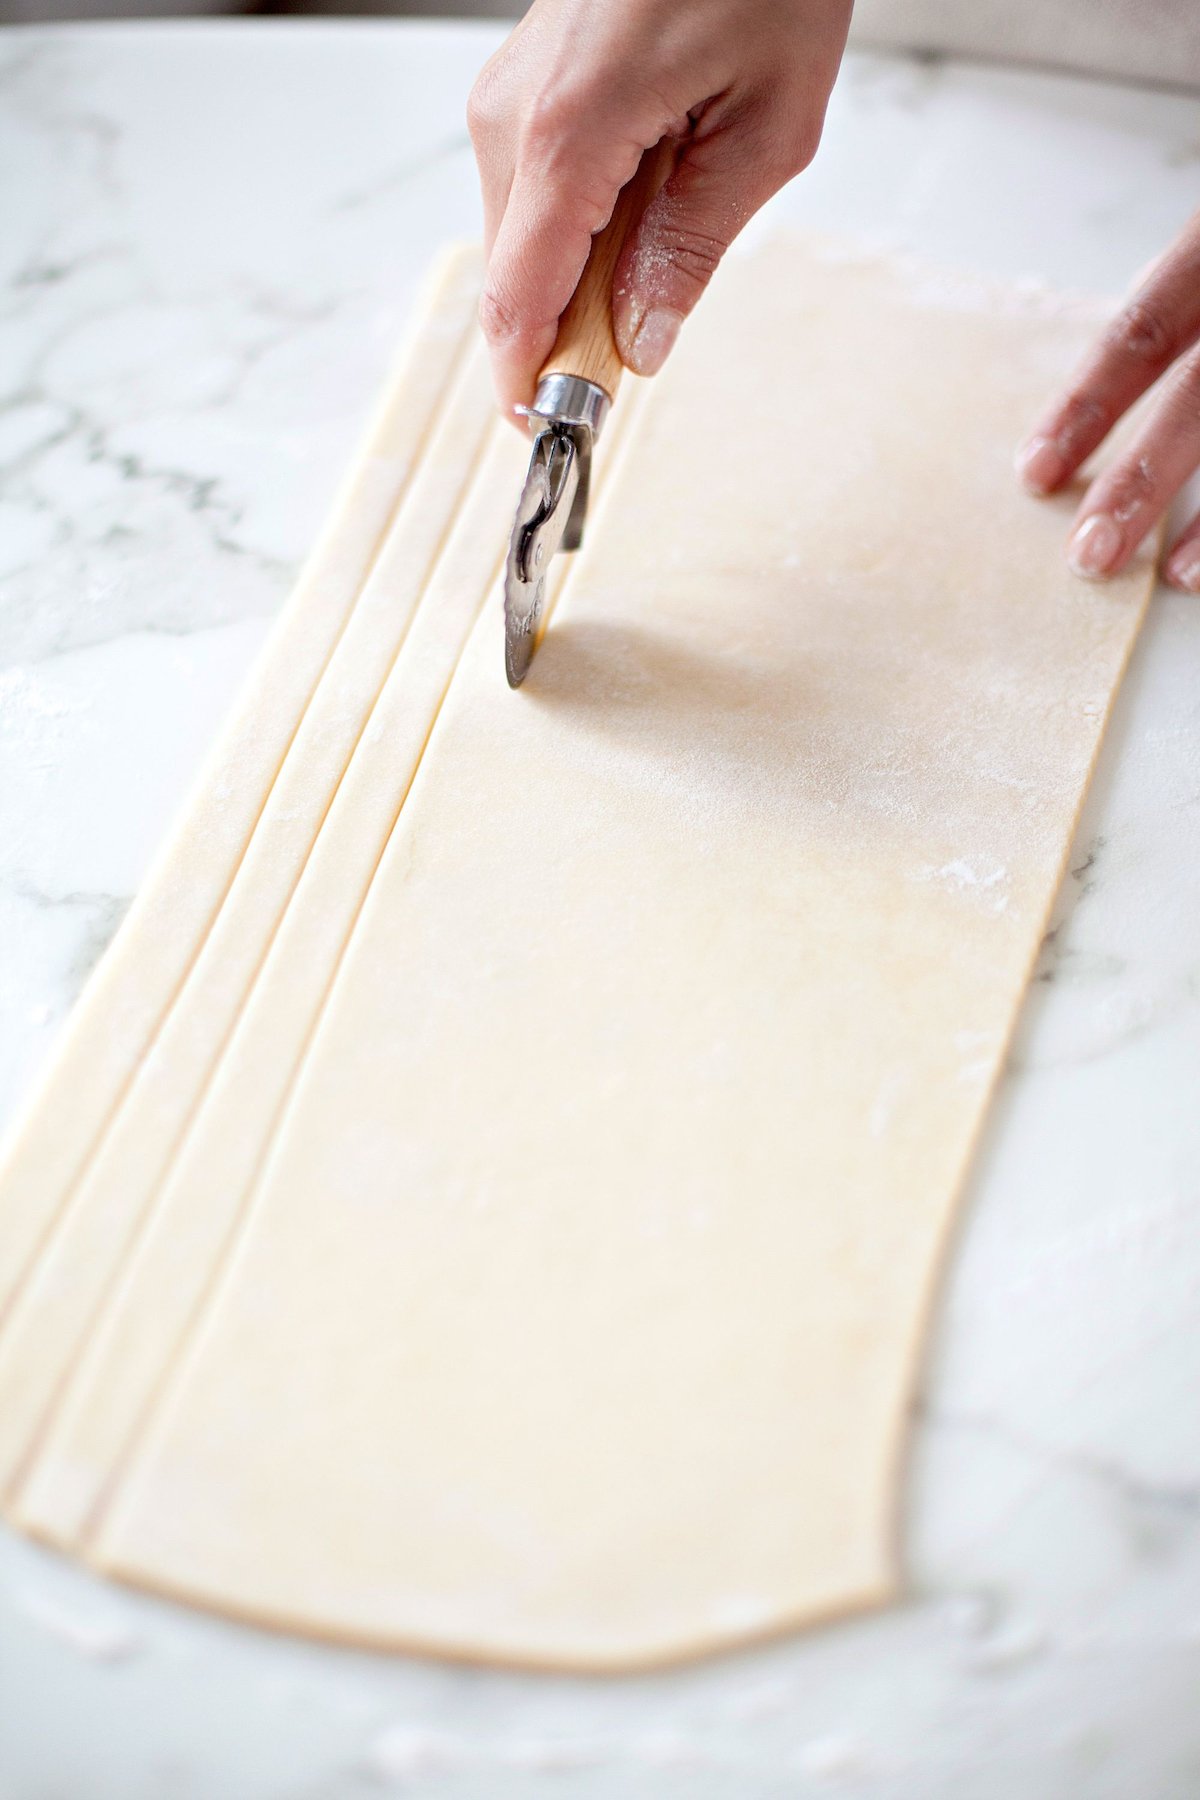 Dough rolled out on a table being cut with a pastry cutter. 